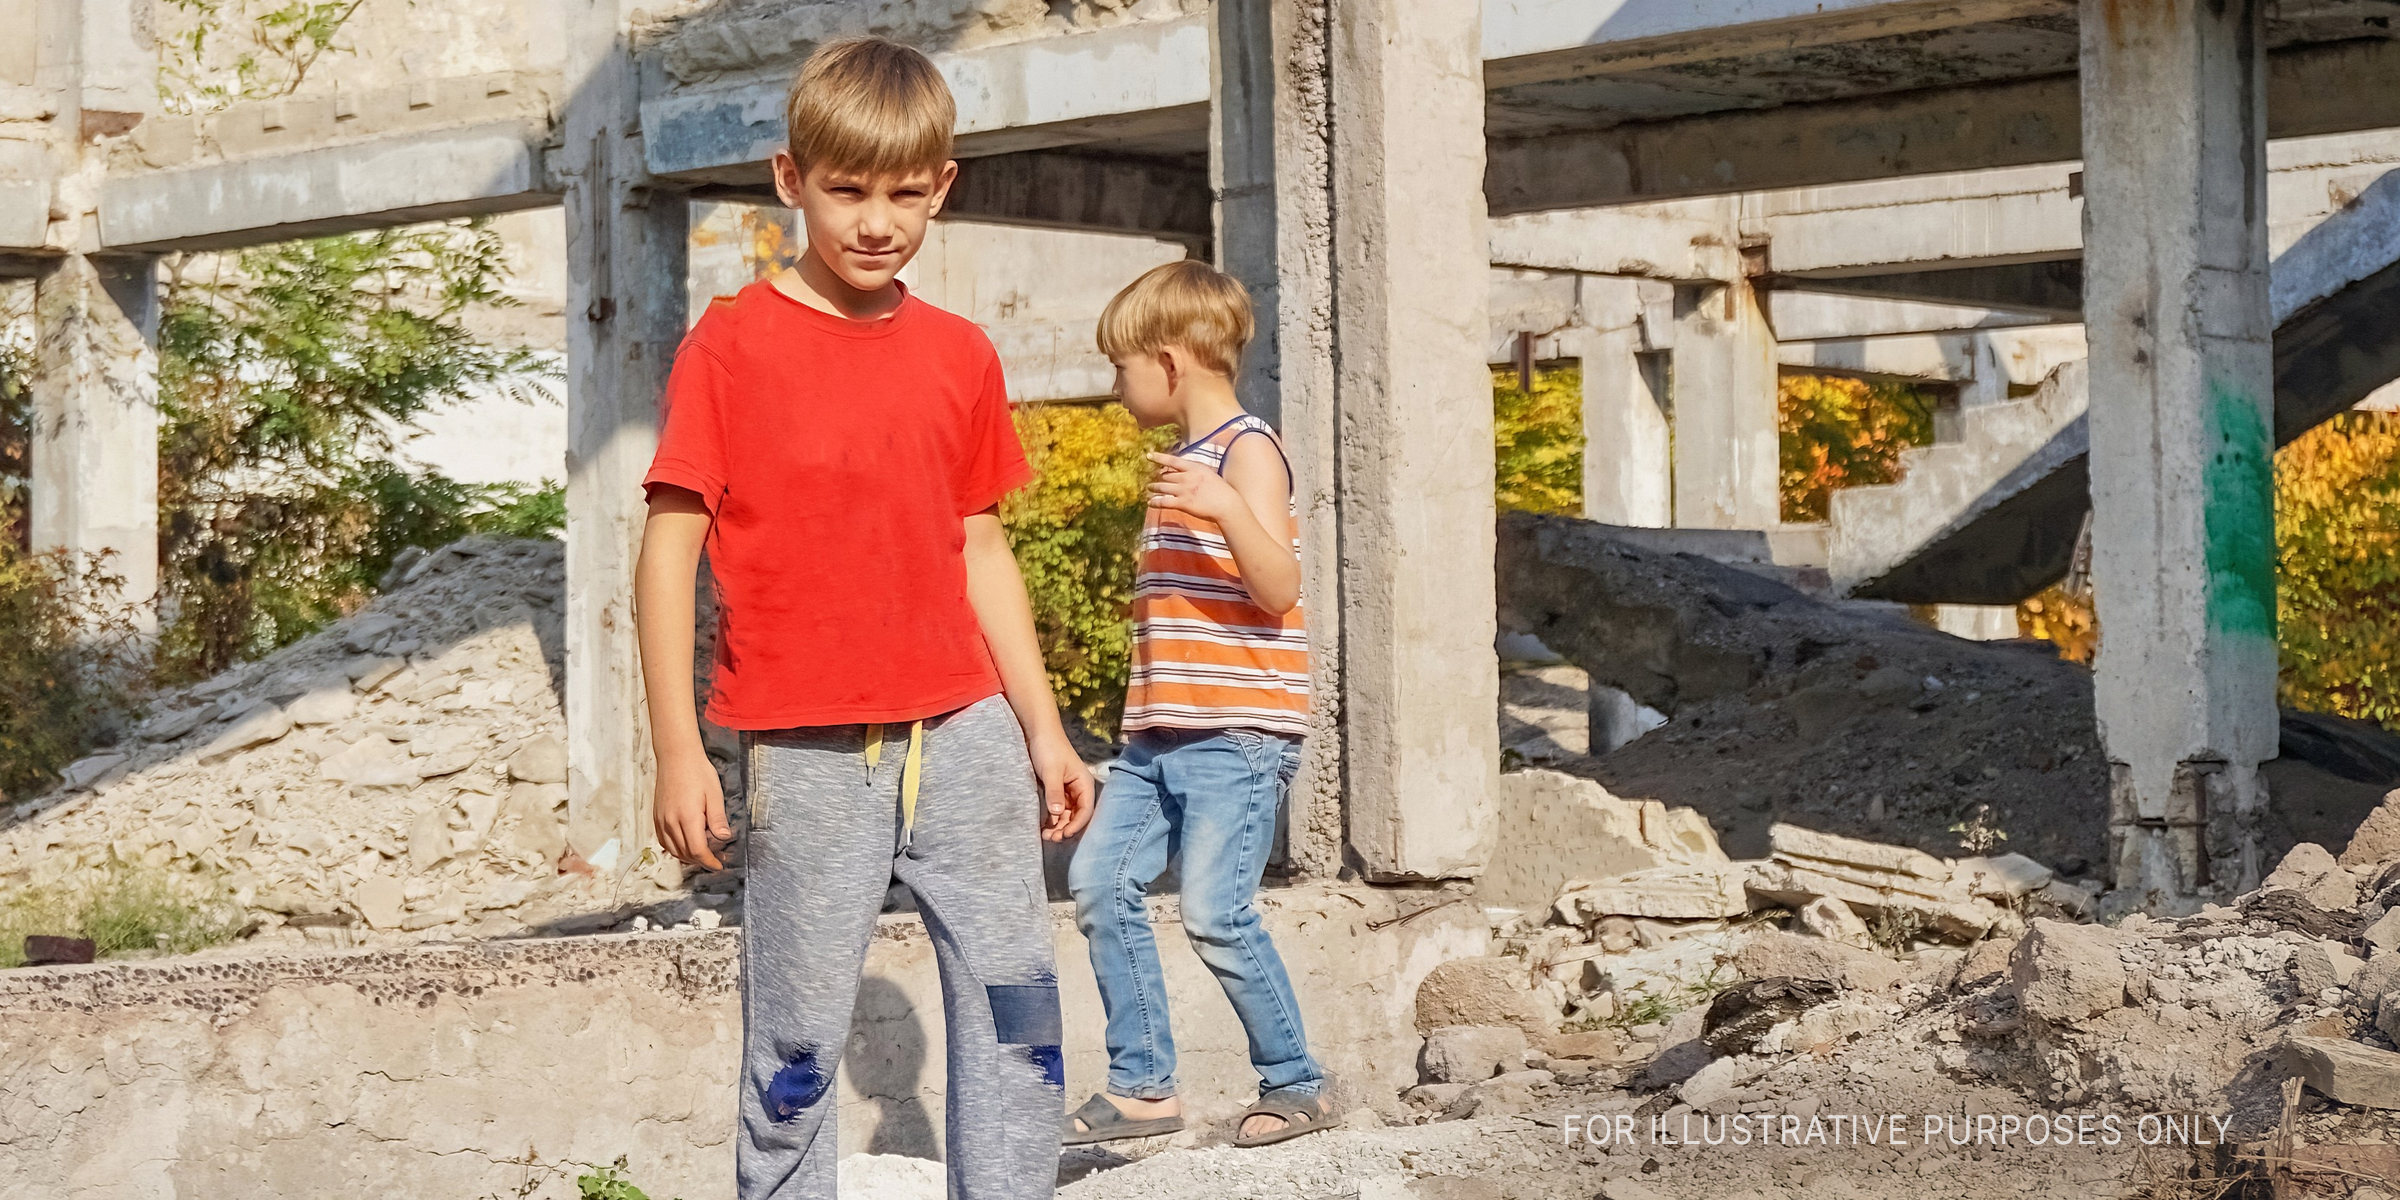 Two young boys standing near old concrete pillars | Source: Shutterstock